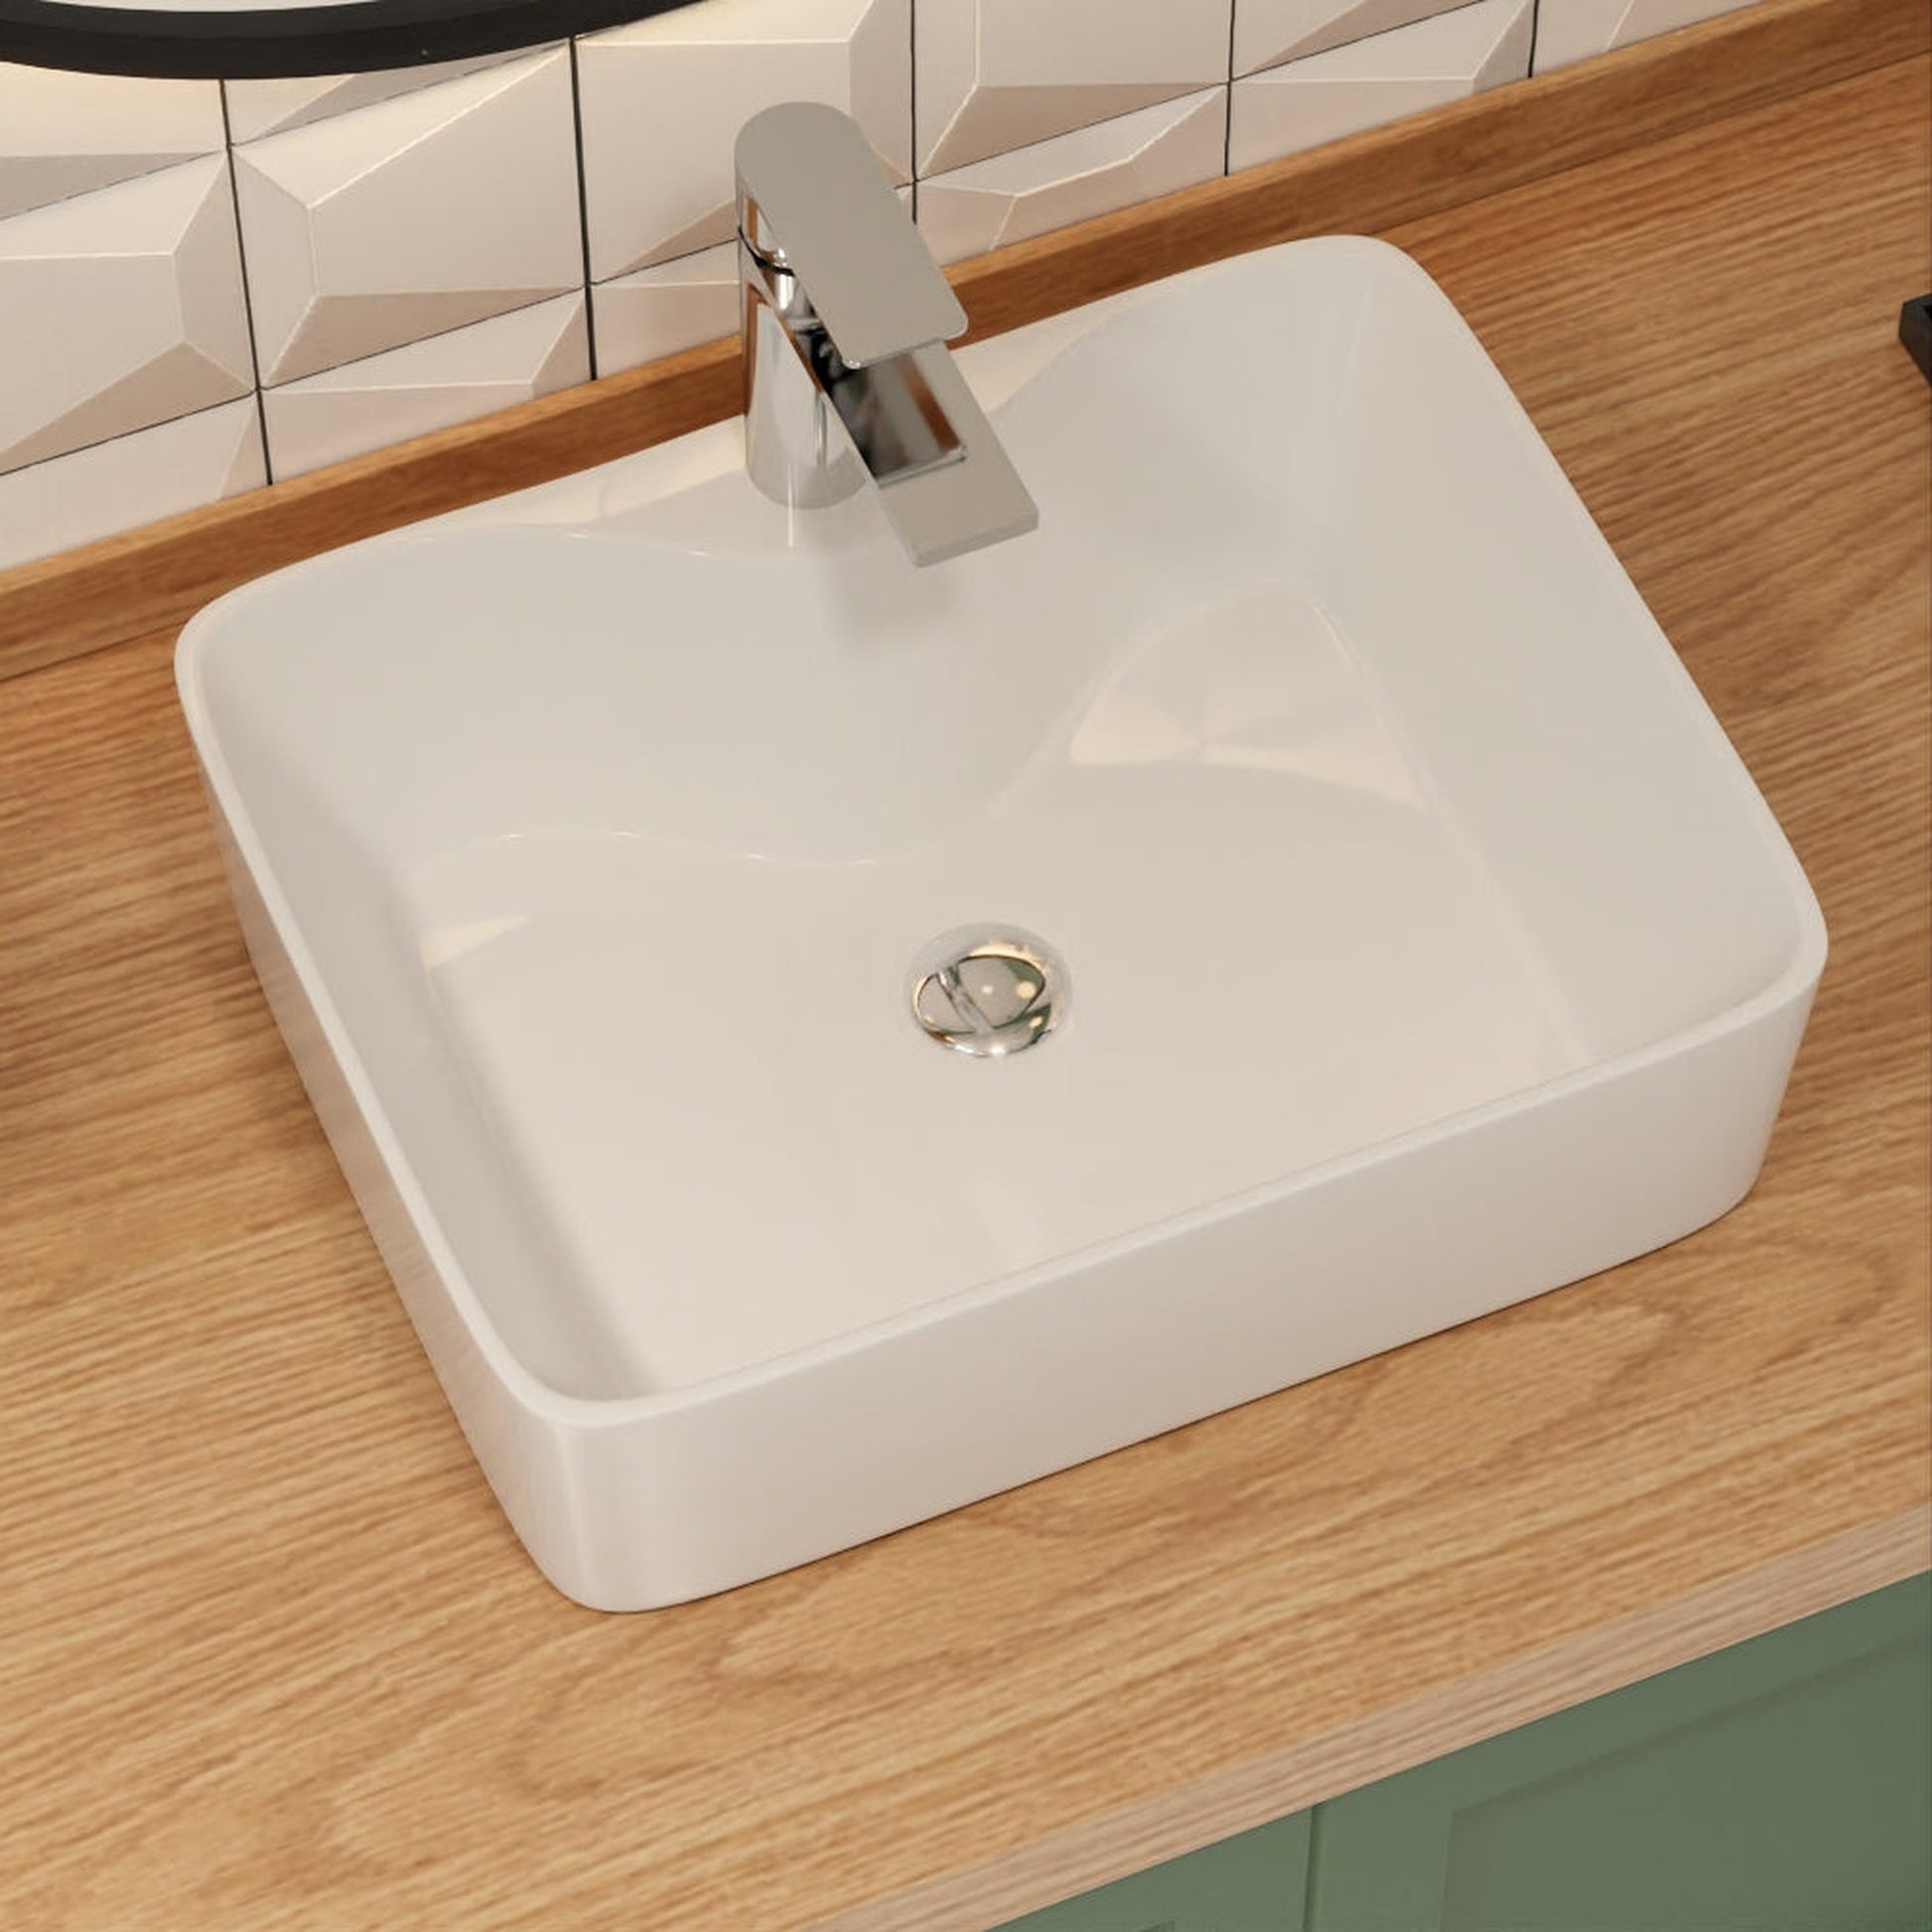 DeerValley Ally 19" Rectangular White Vessel Bathroom Sink With Faucet Hole